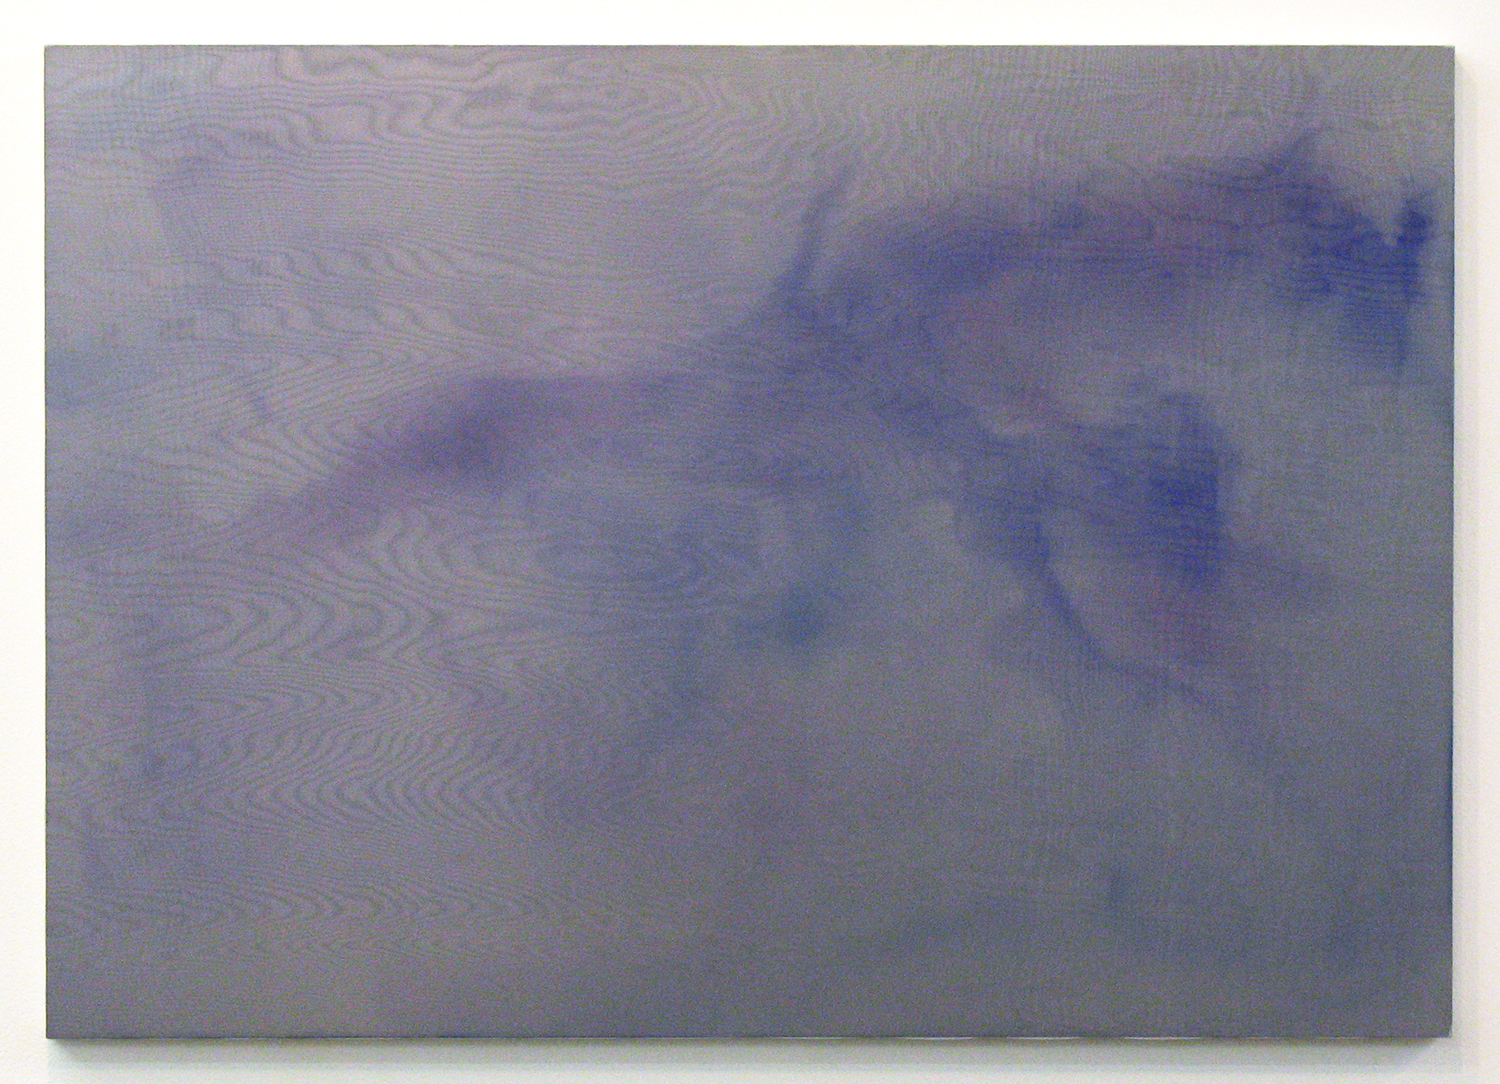 afterglow #5｜残光 #5｜panel, stainless steel sheet, glass organdy, acrylic｜594 x 840 mm｜2008<br>¥250,000 - 400,000